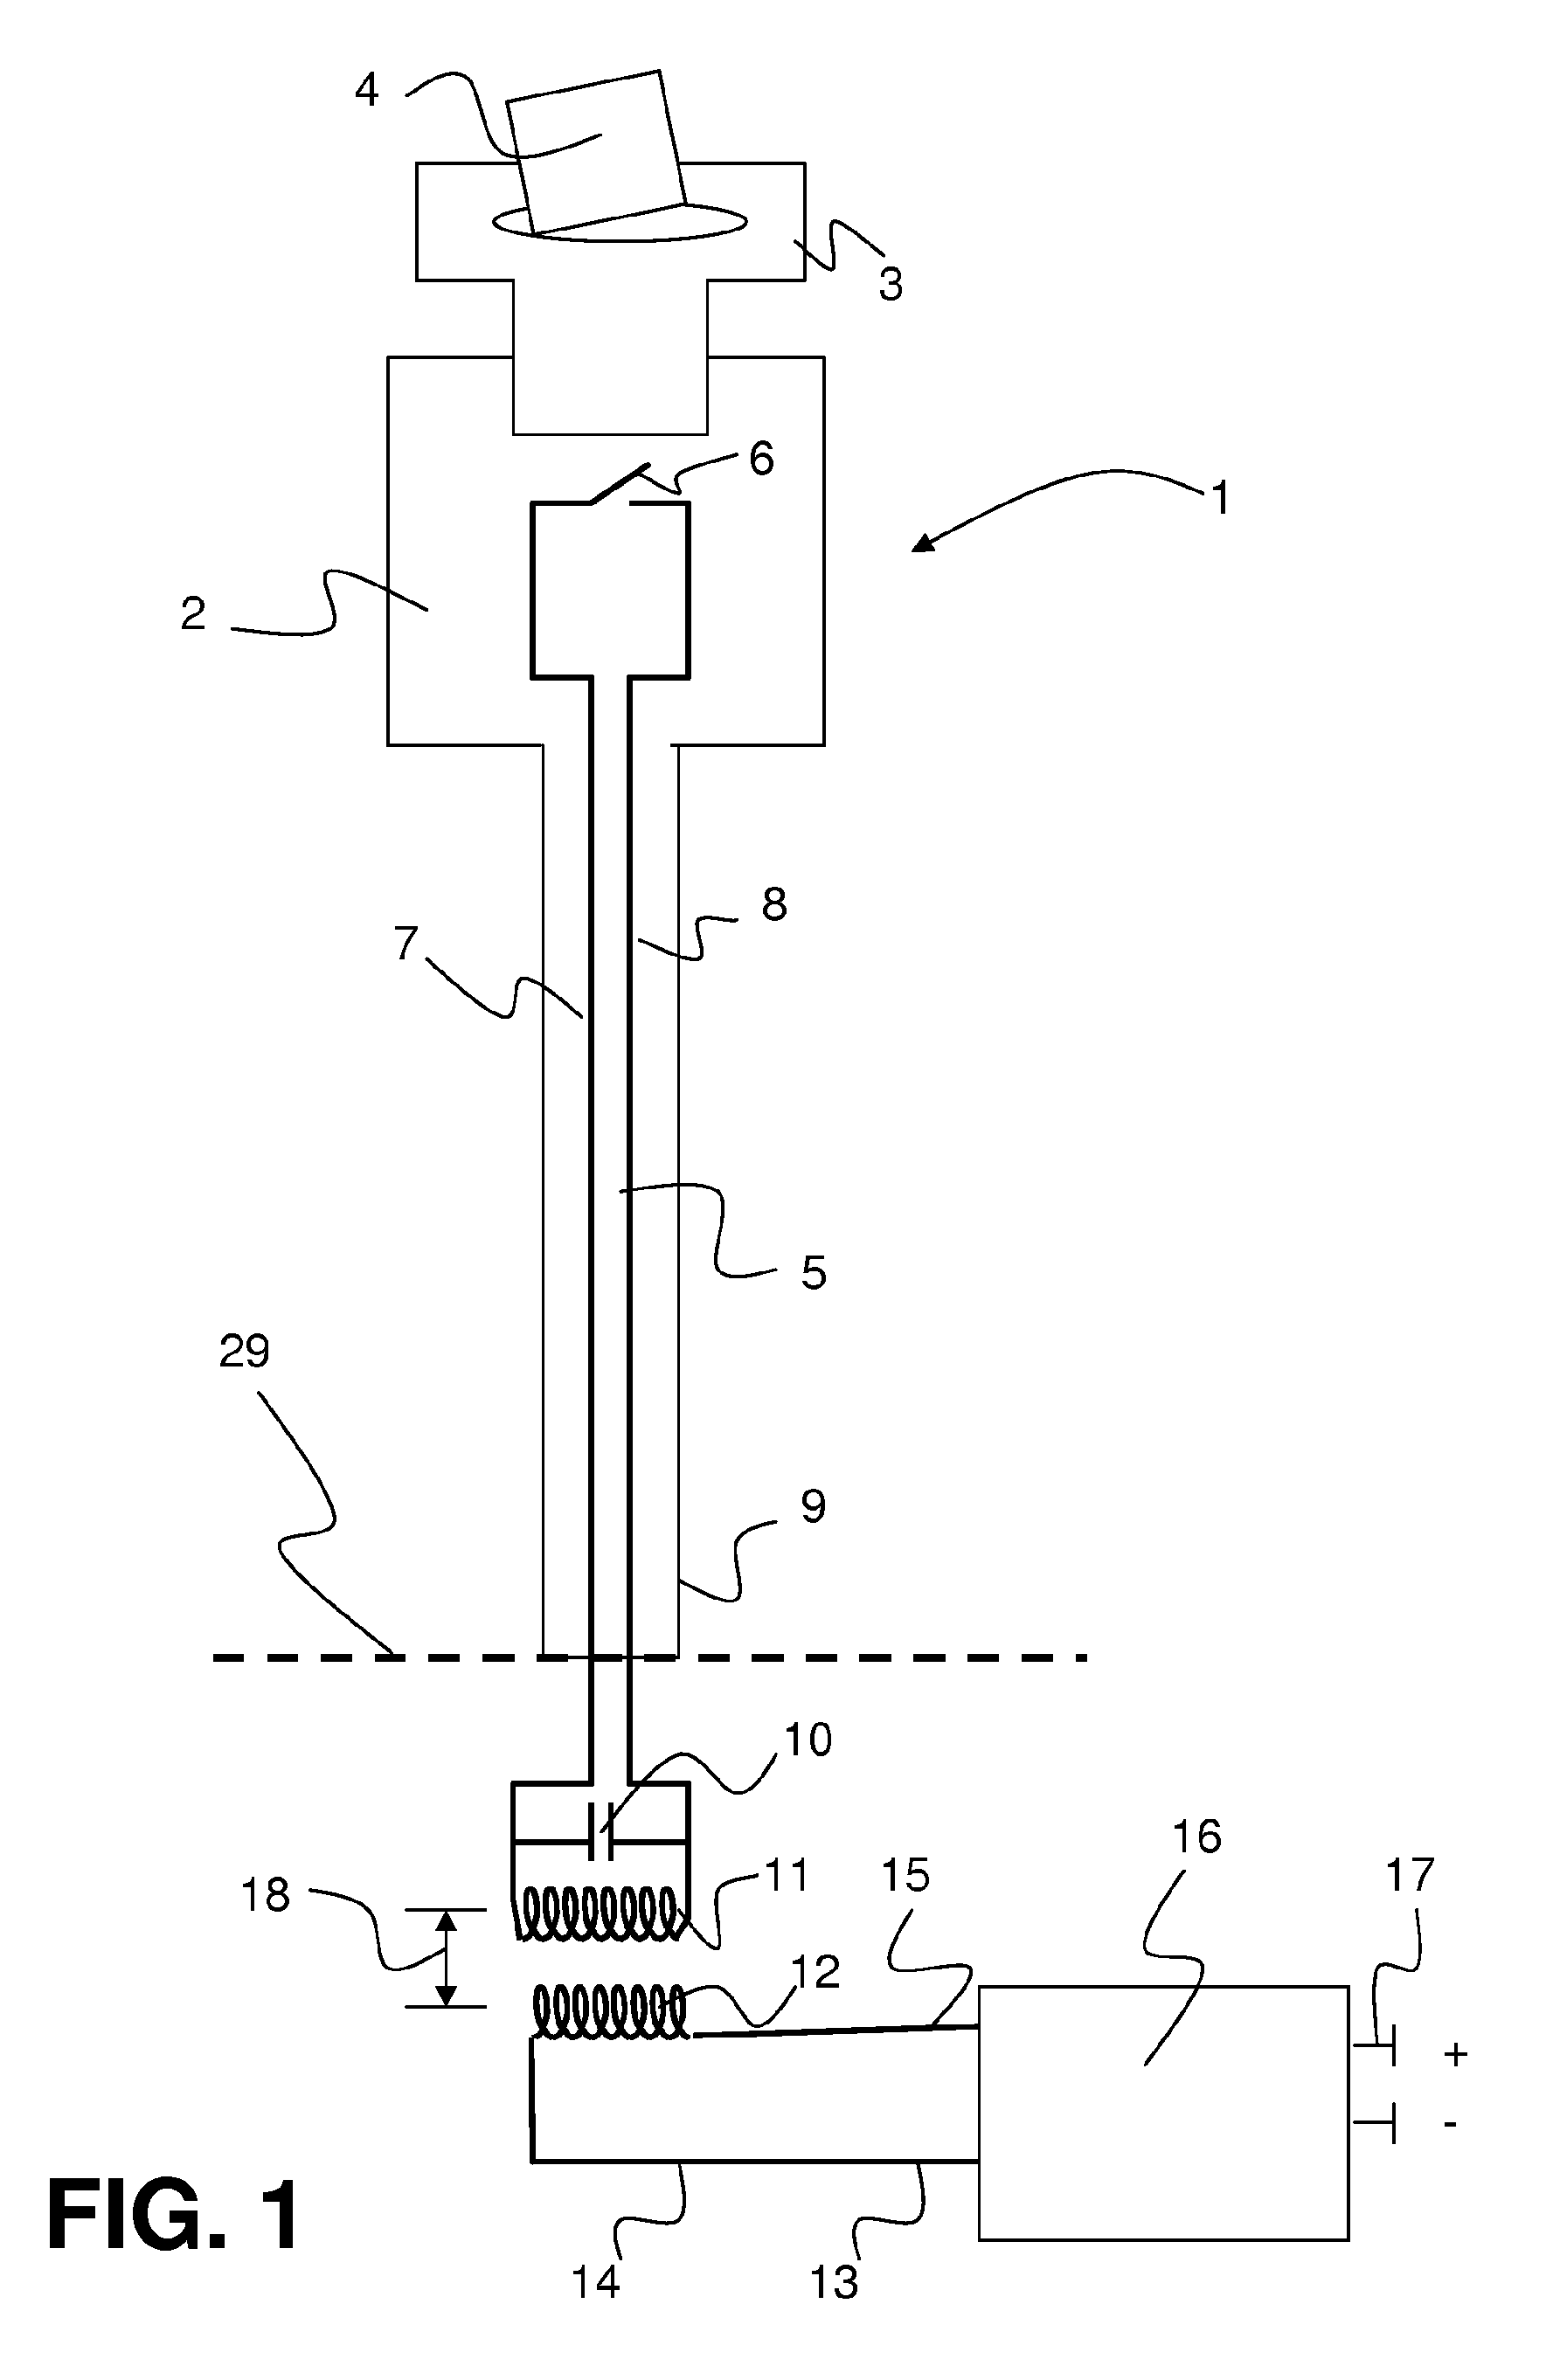 Electronic status detection device